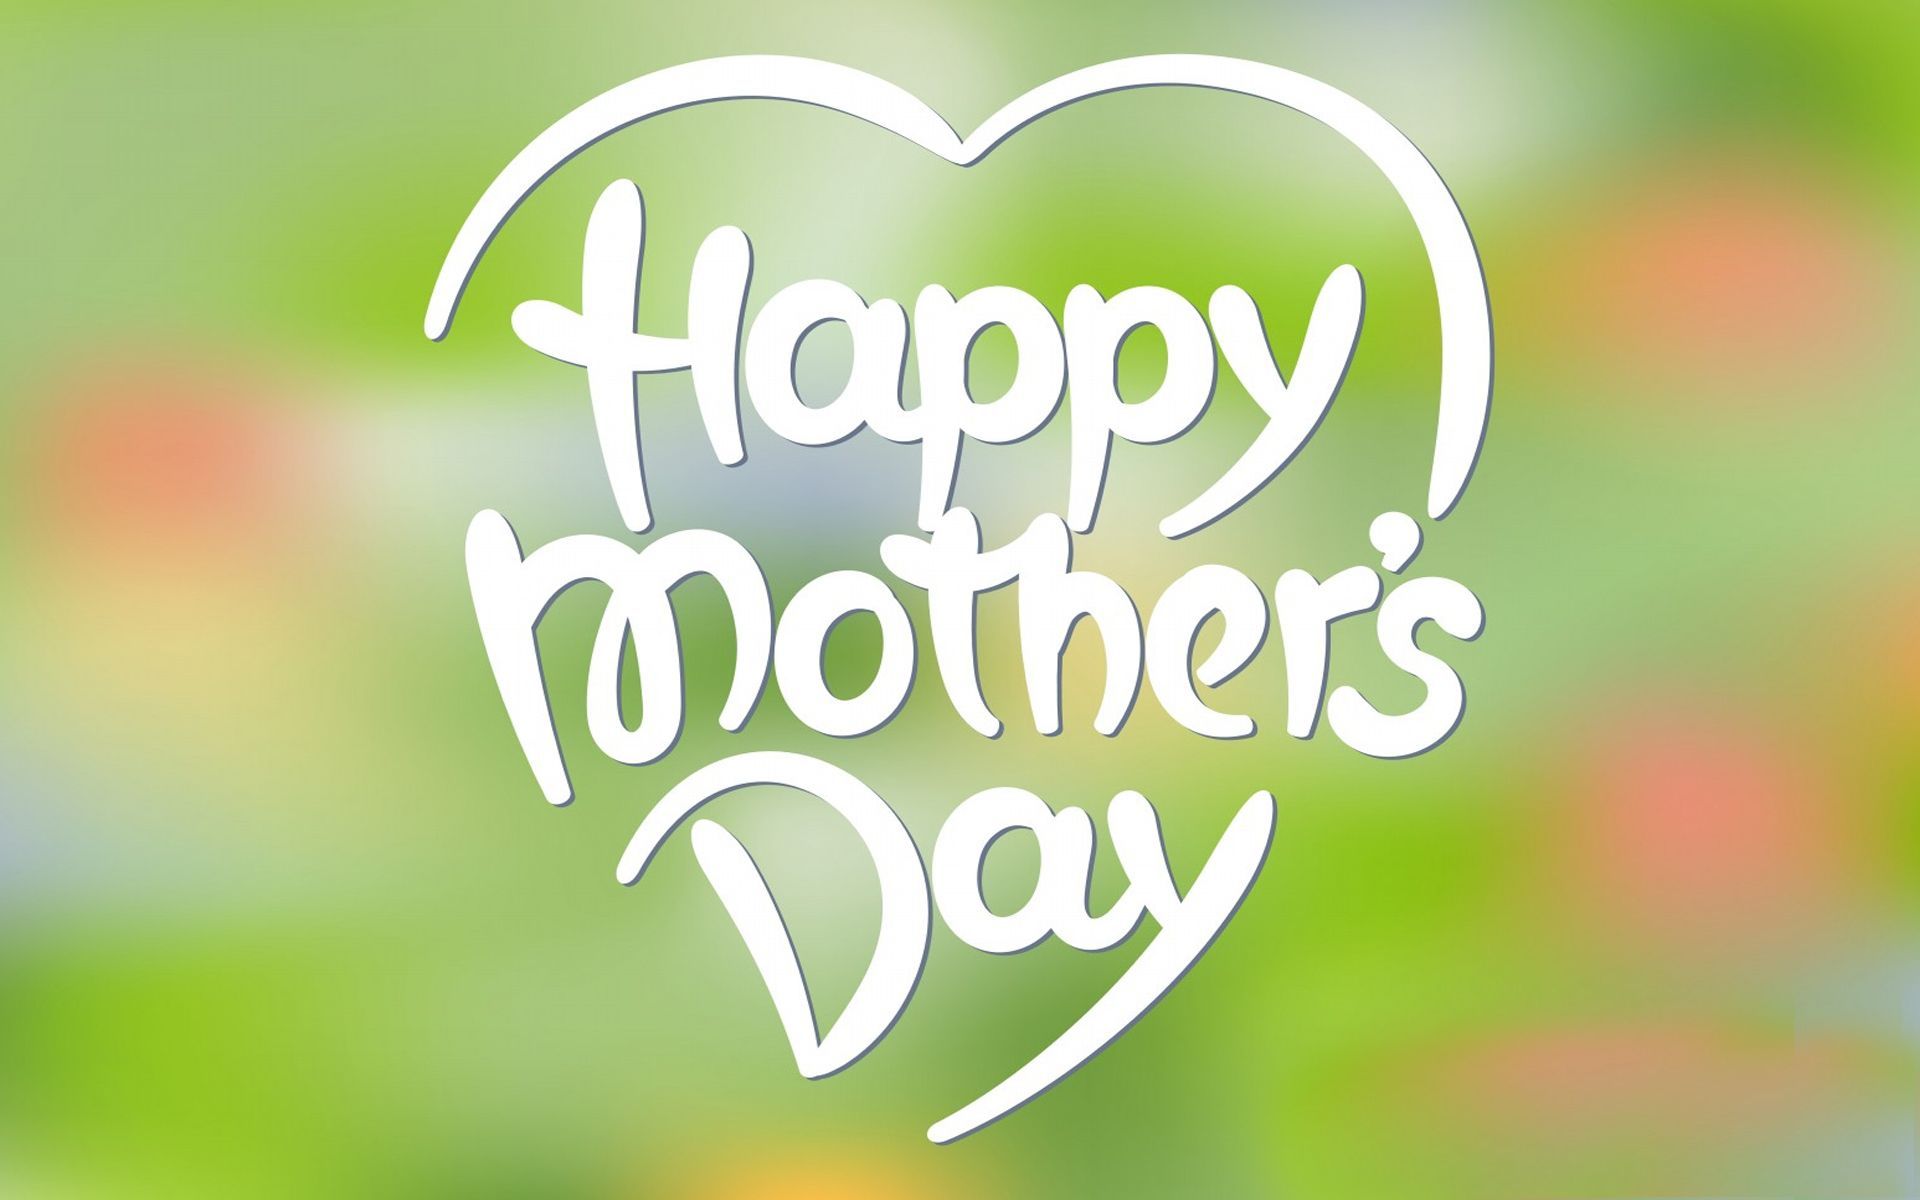 Happy Mother's Day 2018 Image, Photo, Pics, Wallpaper, HD